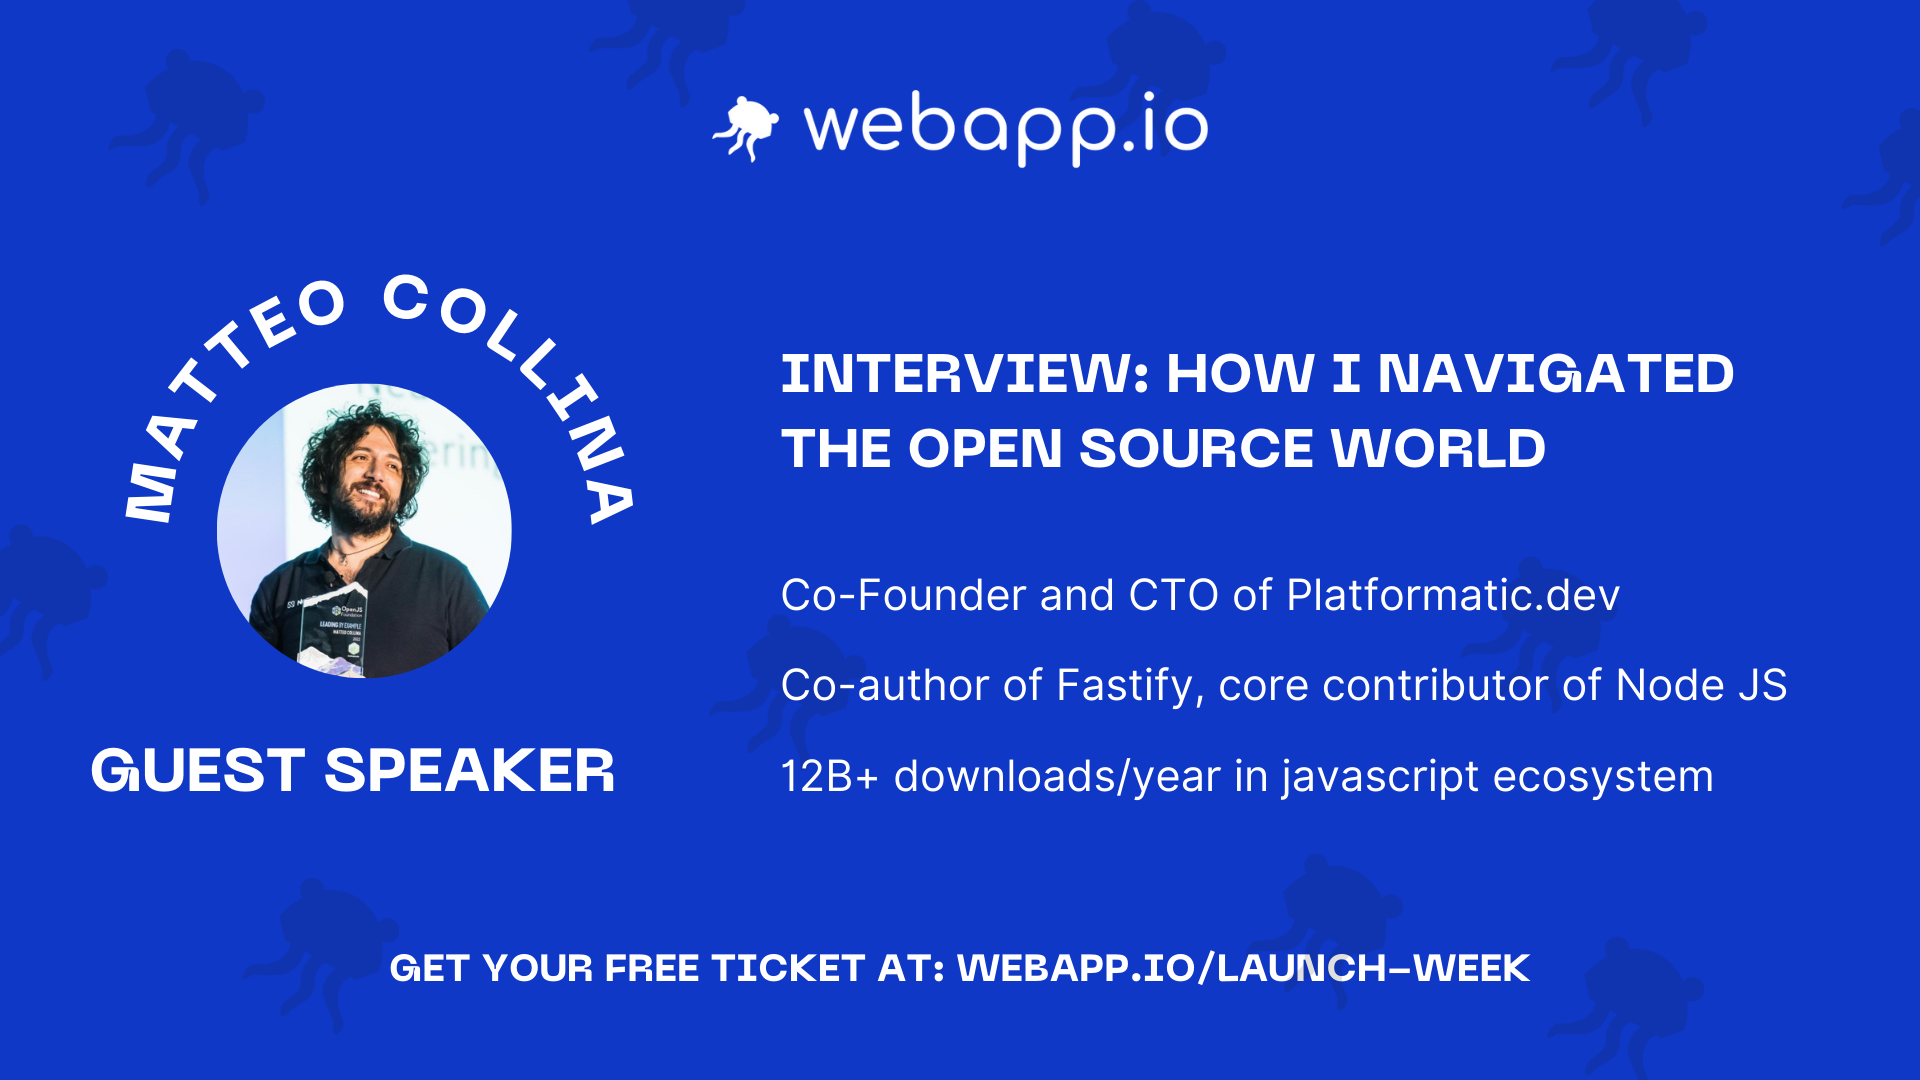 How I Navigated the Open Source World: Matteo Collina